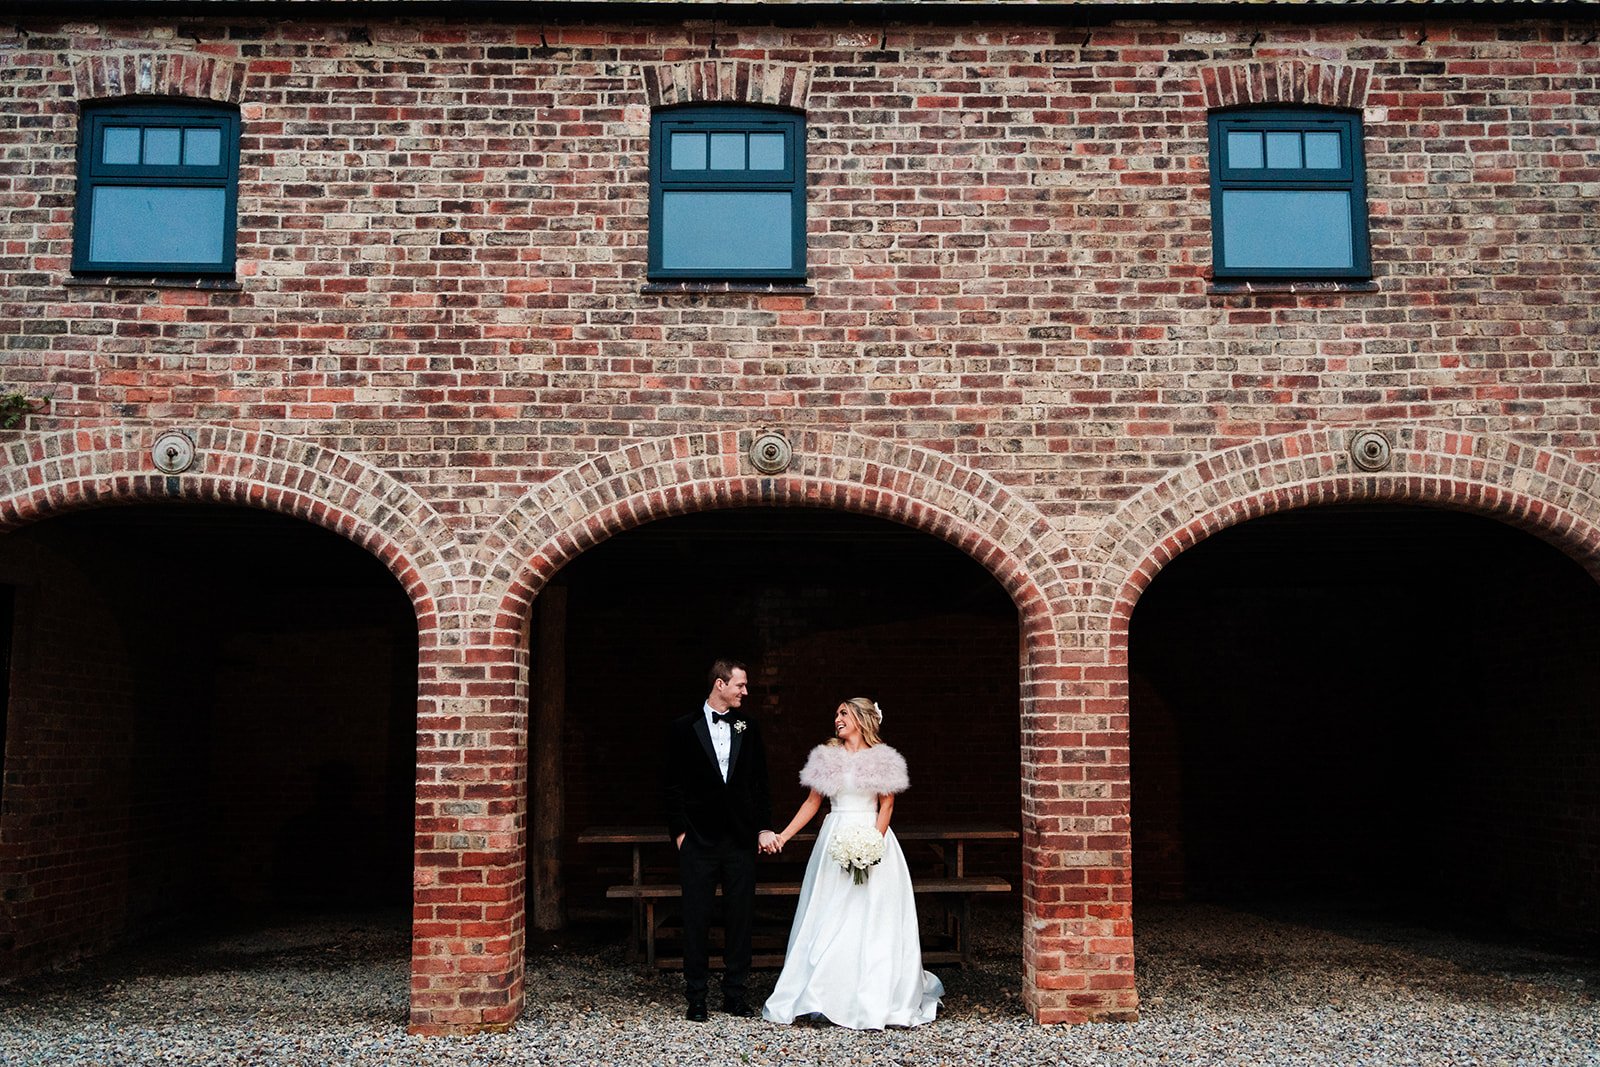 A bride and groom stand hand-in-hand under the archway of a large barn building